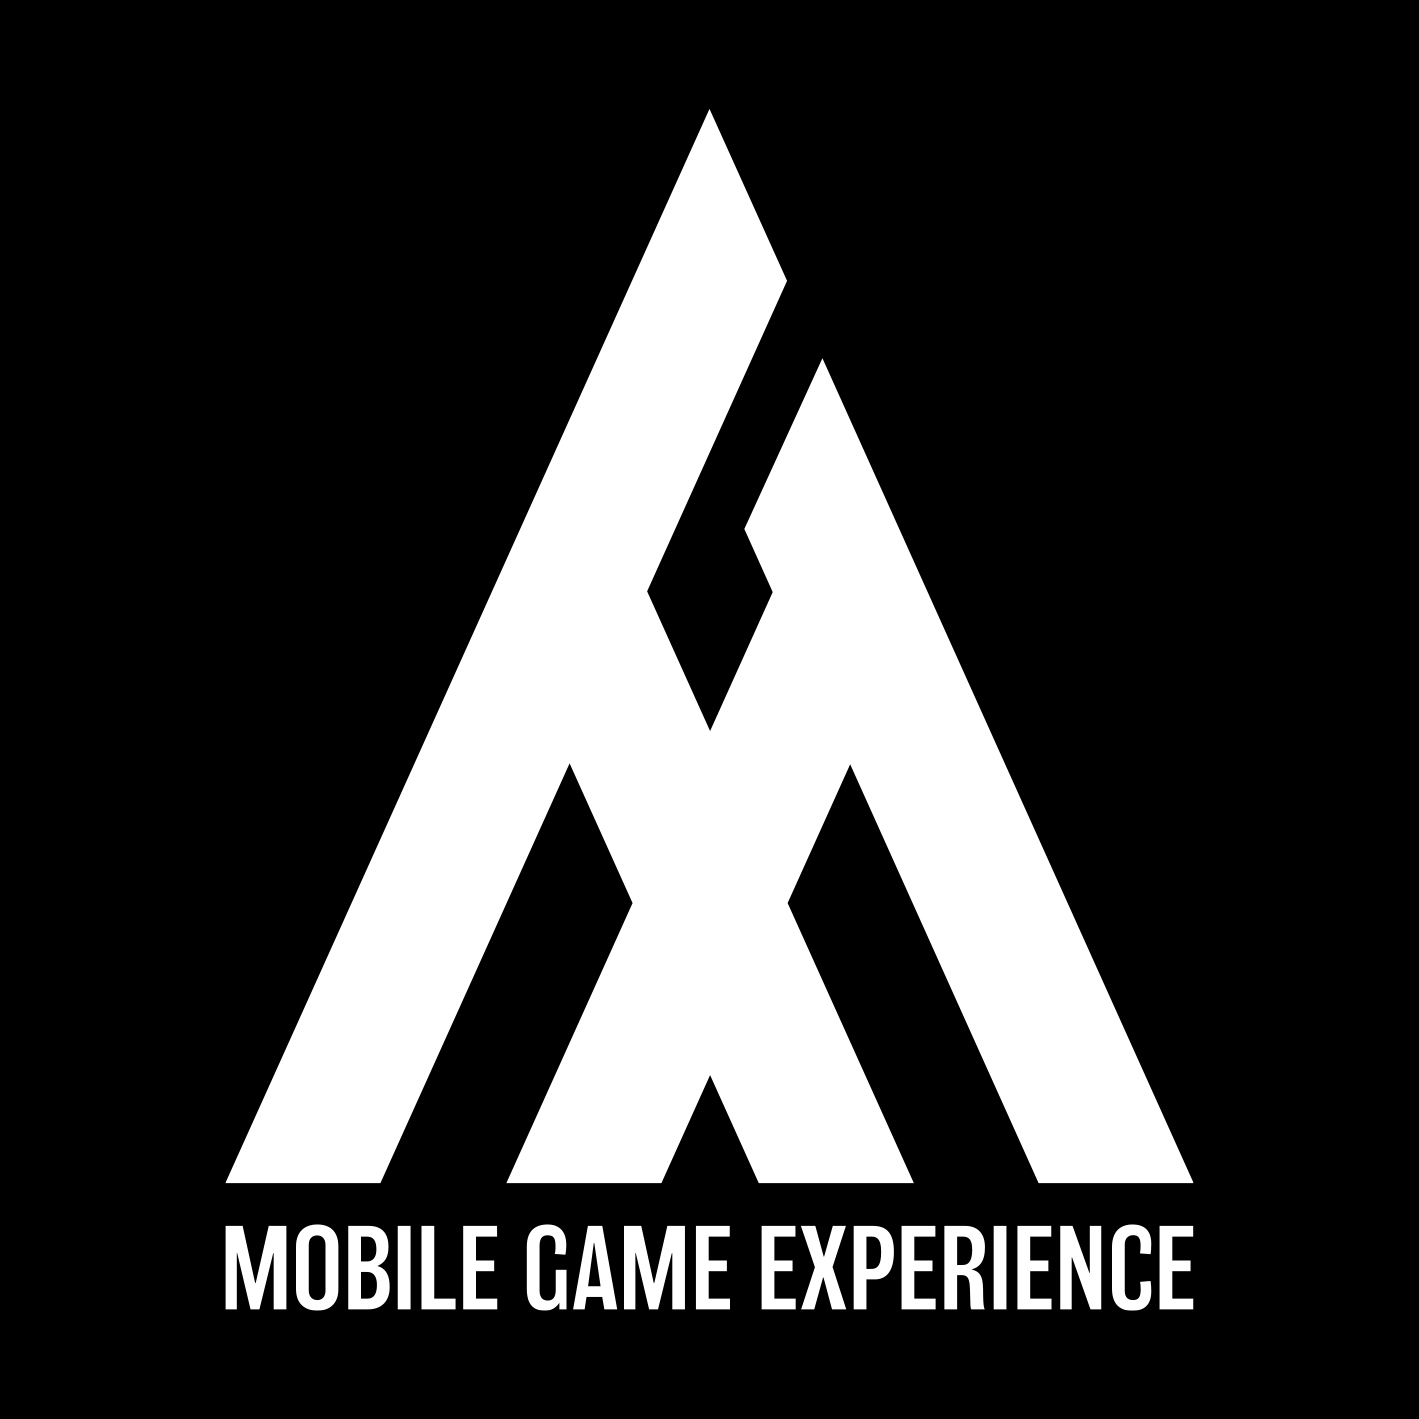 MOBILE GAME EXPERIENCE LOGO